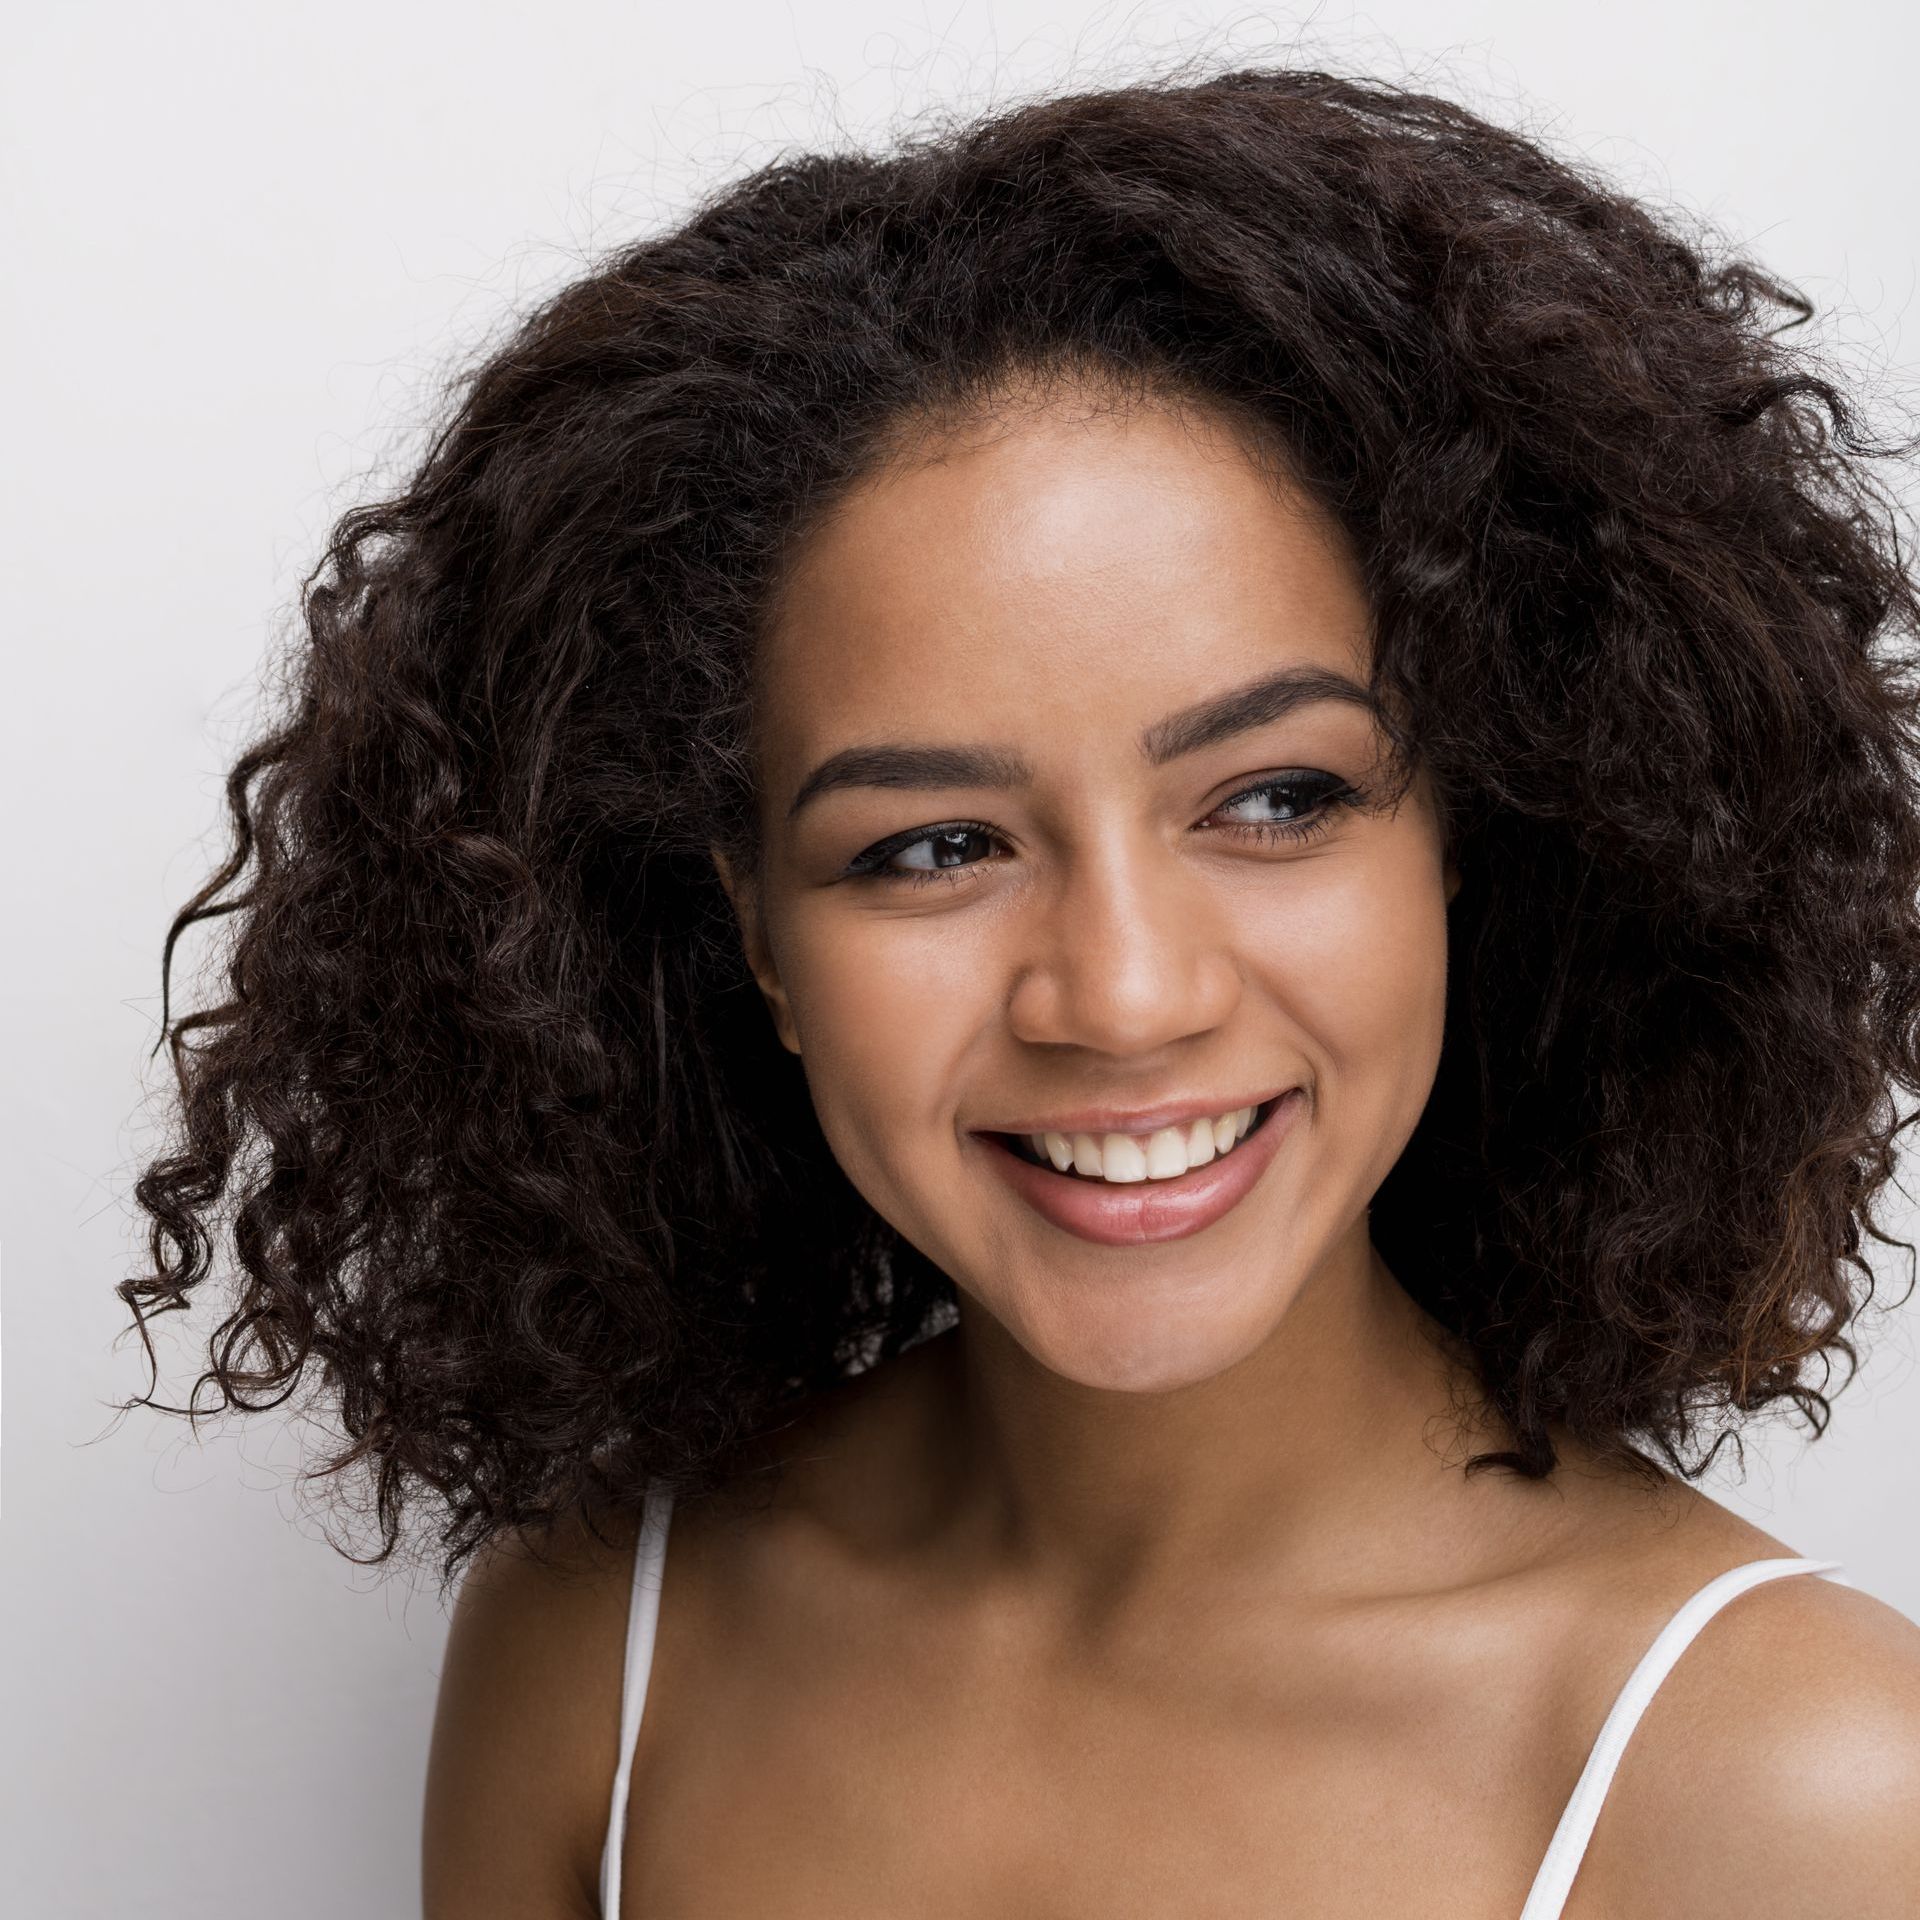 a woman with curly hair and hoop earrings is smiling .